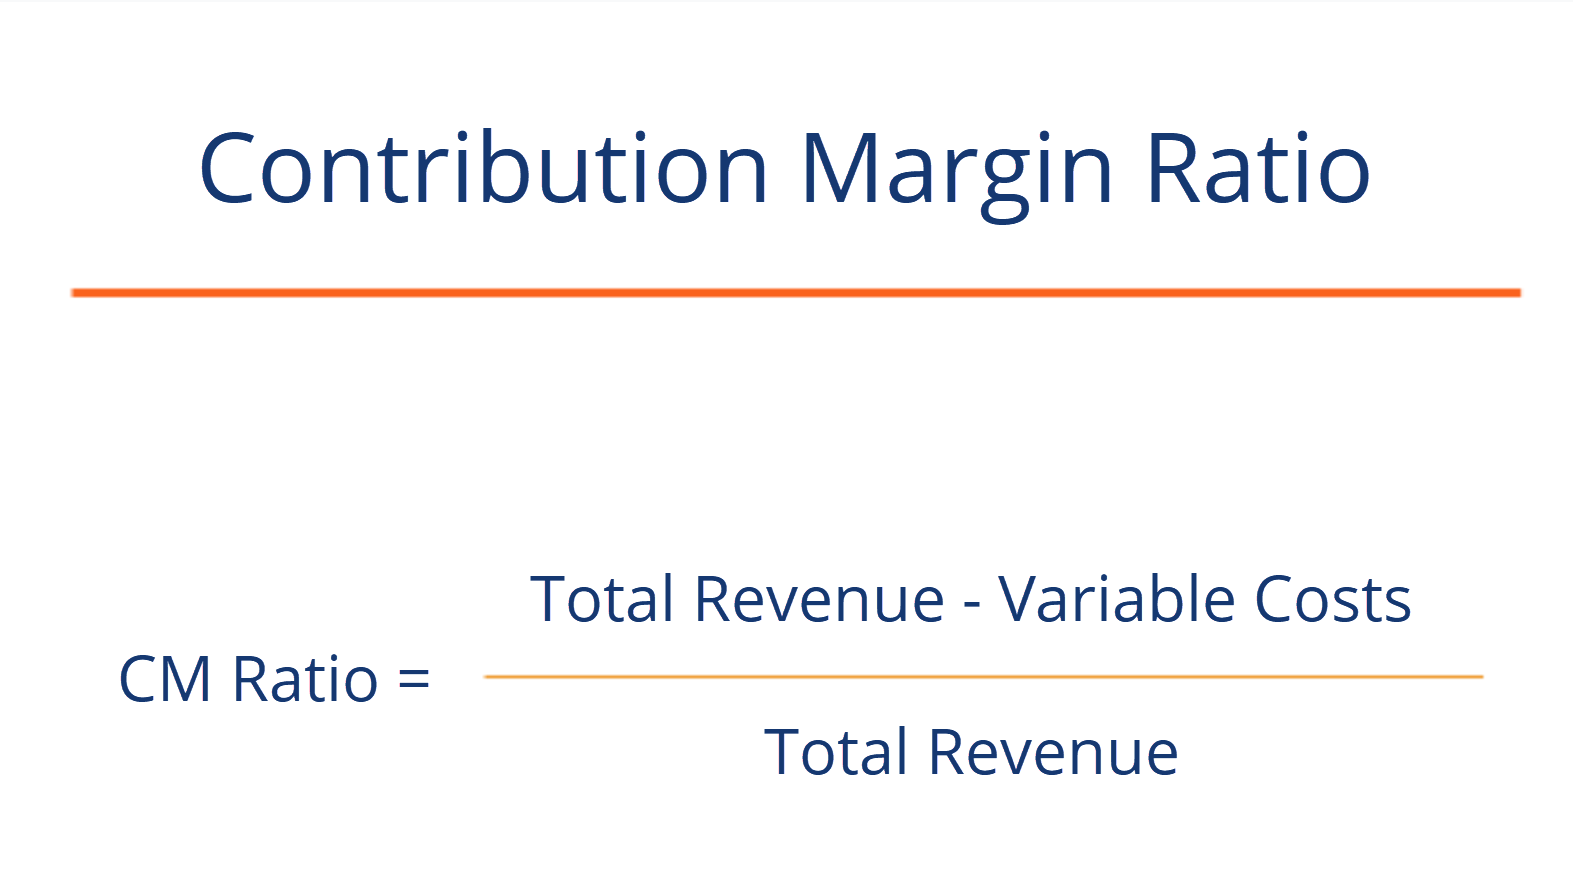 Contribution Margin Ratio - Revenue After Variable Costs